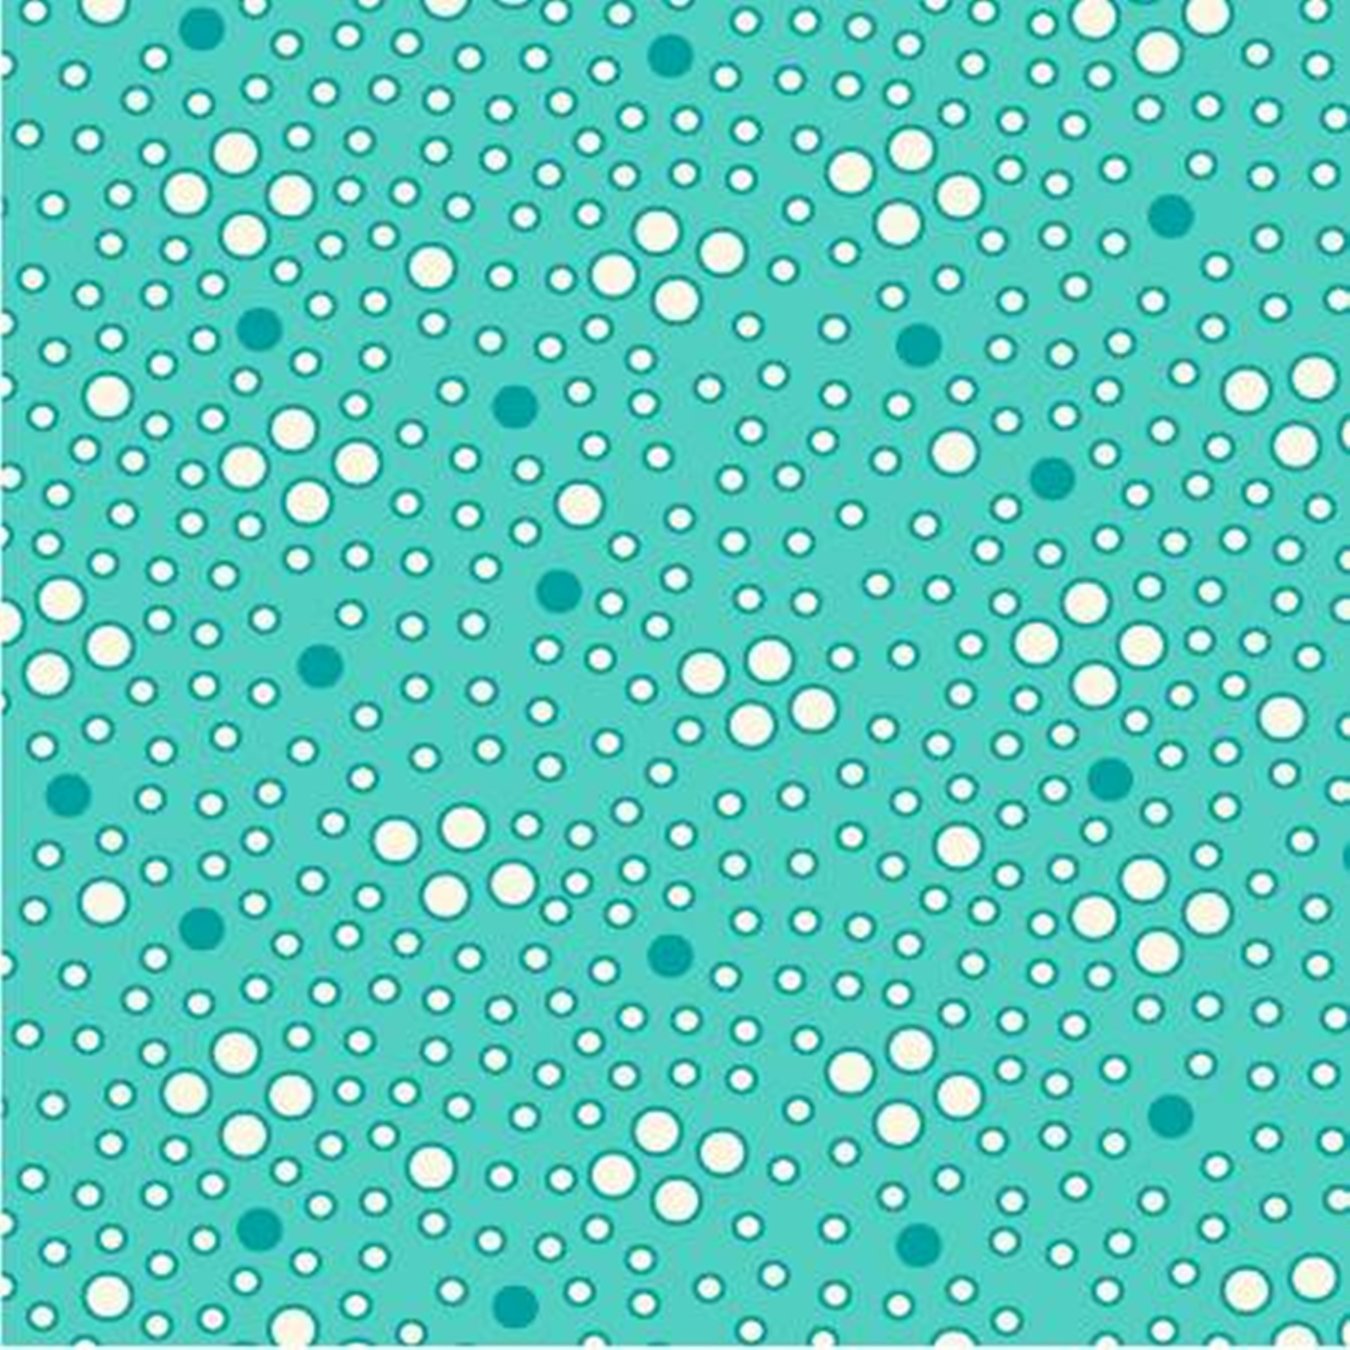 Playtime c. 1930 - Dots Blue Teal - Licence To Quilt